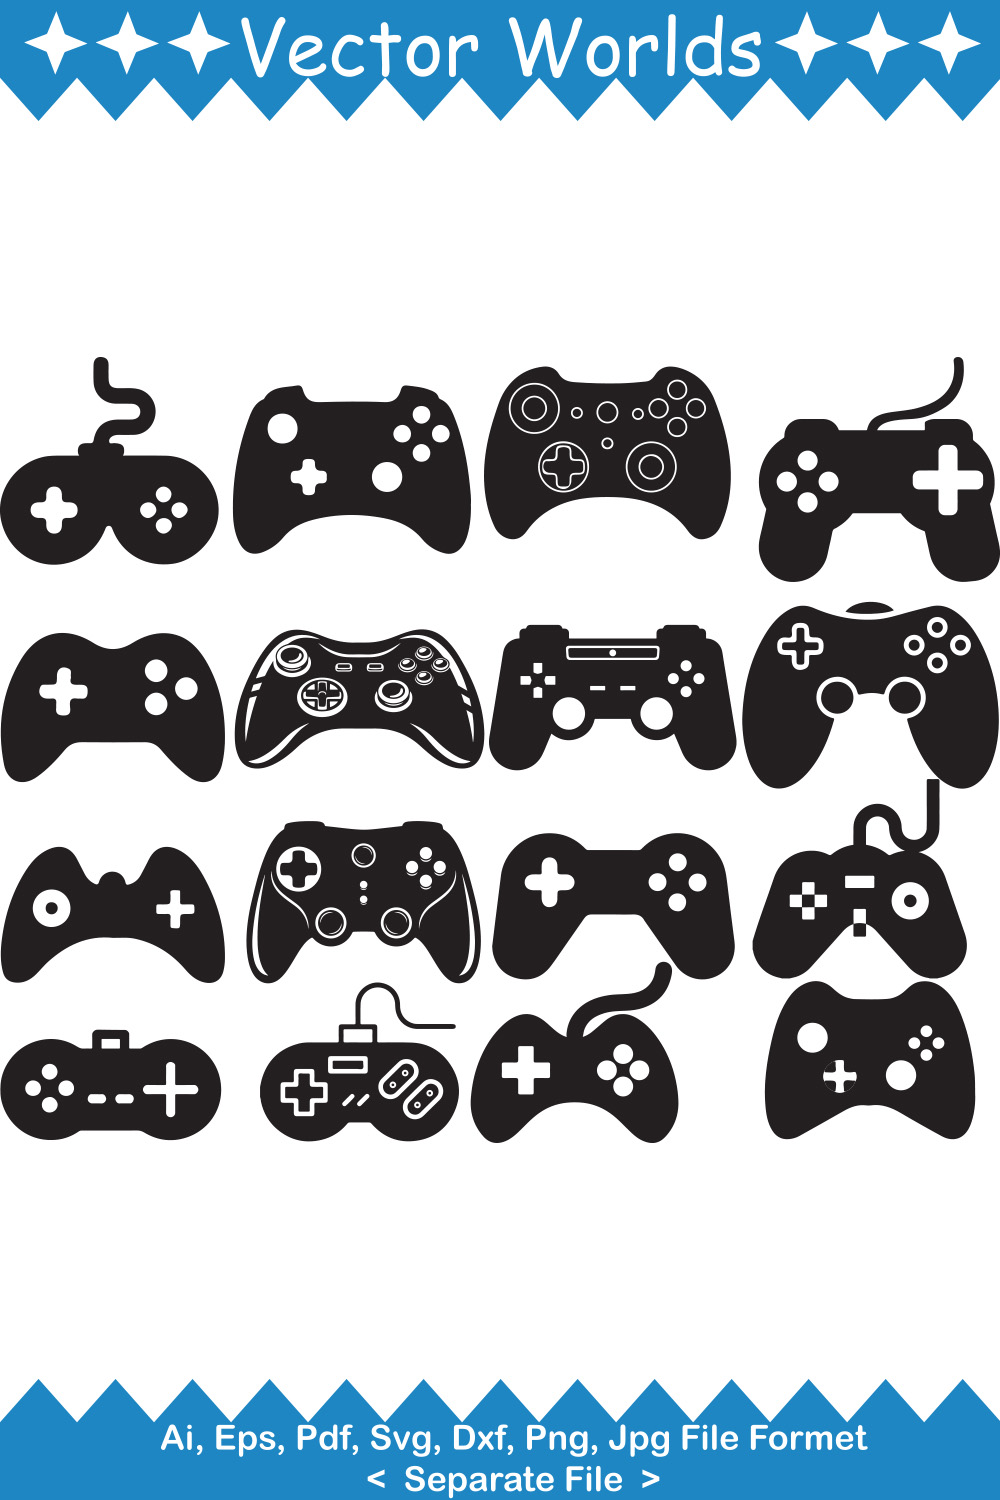 A collection of gorgeous images of game controller silhouettes